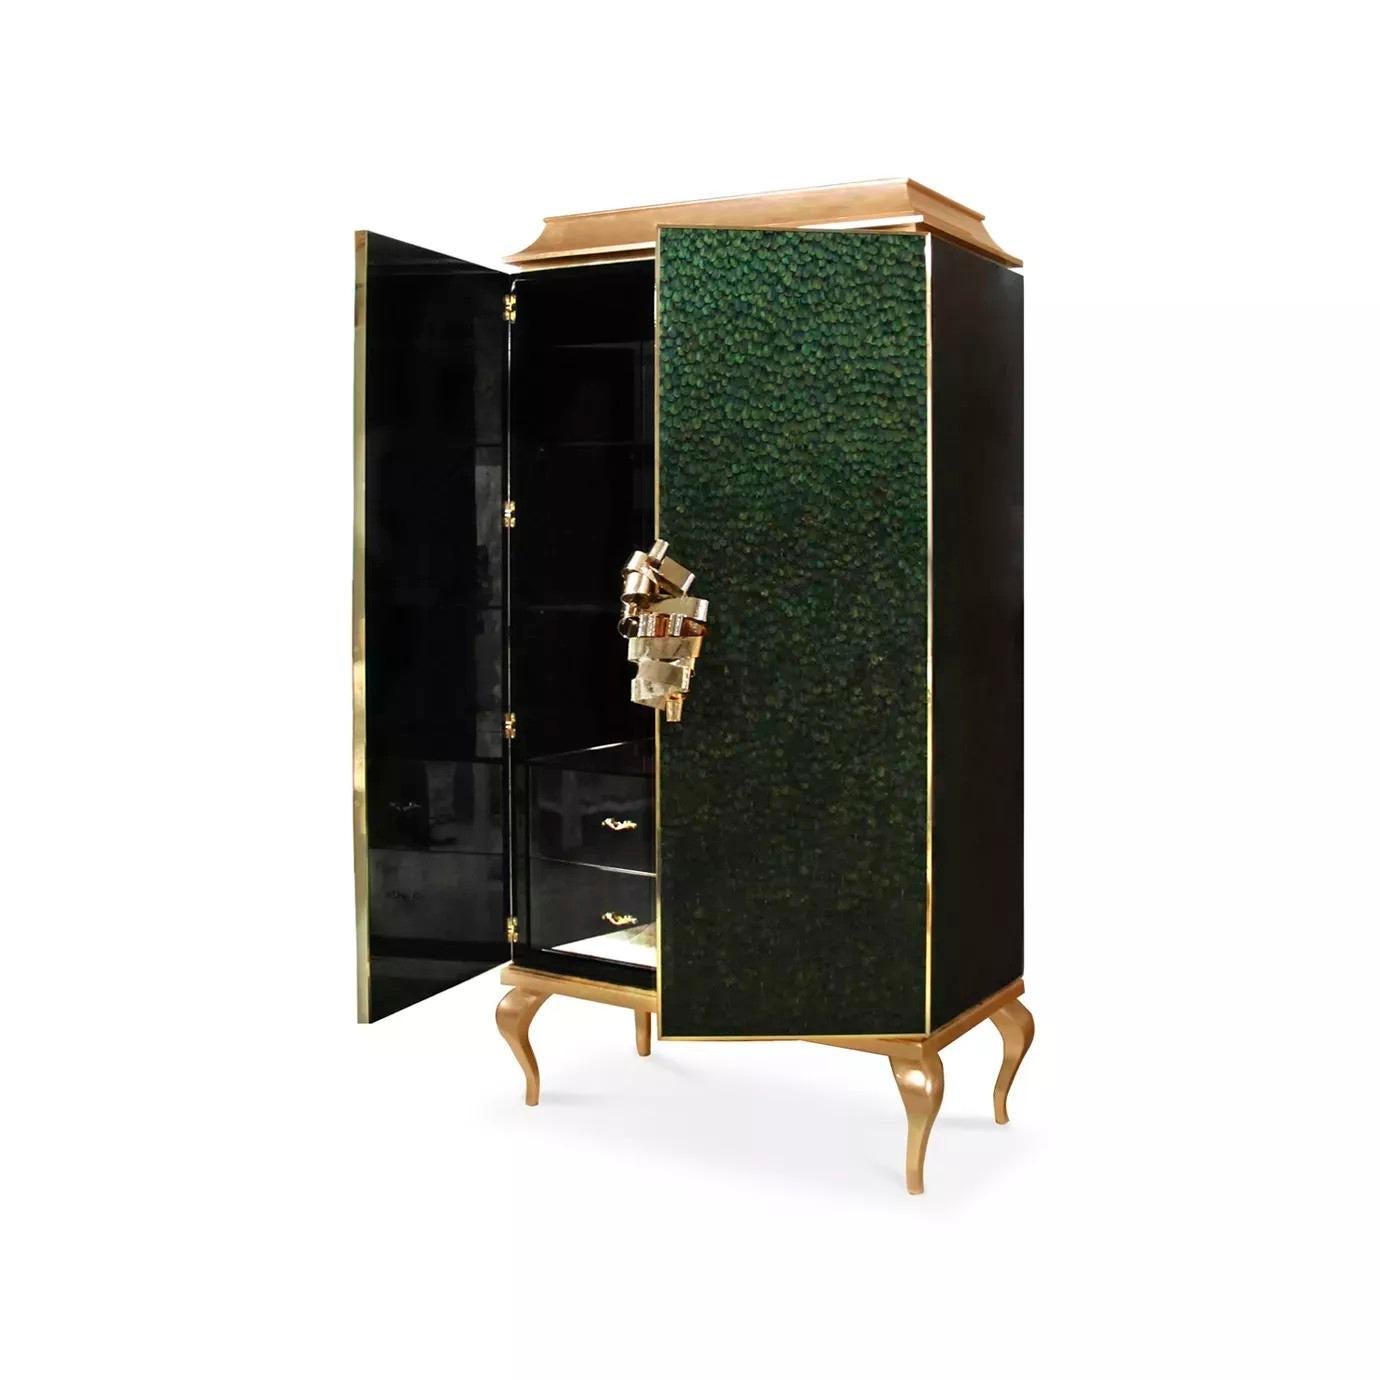 This utterly desirable double door pagoda top armoire is covered in delicate, individually placed natural feathers. An exquisite metal ribbon opens the doors to a lavish interior graced with four drawers and two adjustable shelves. The top and base